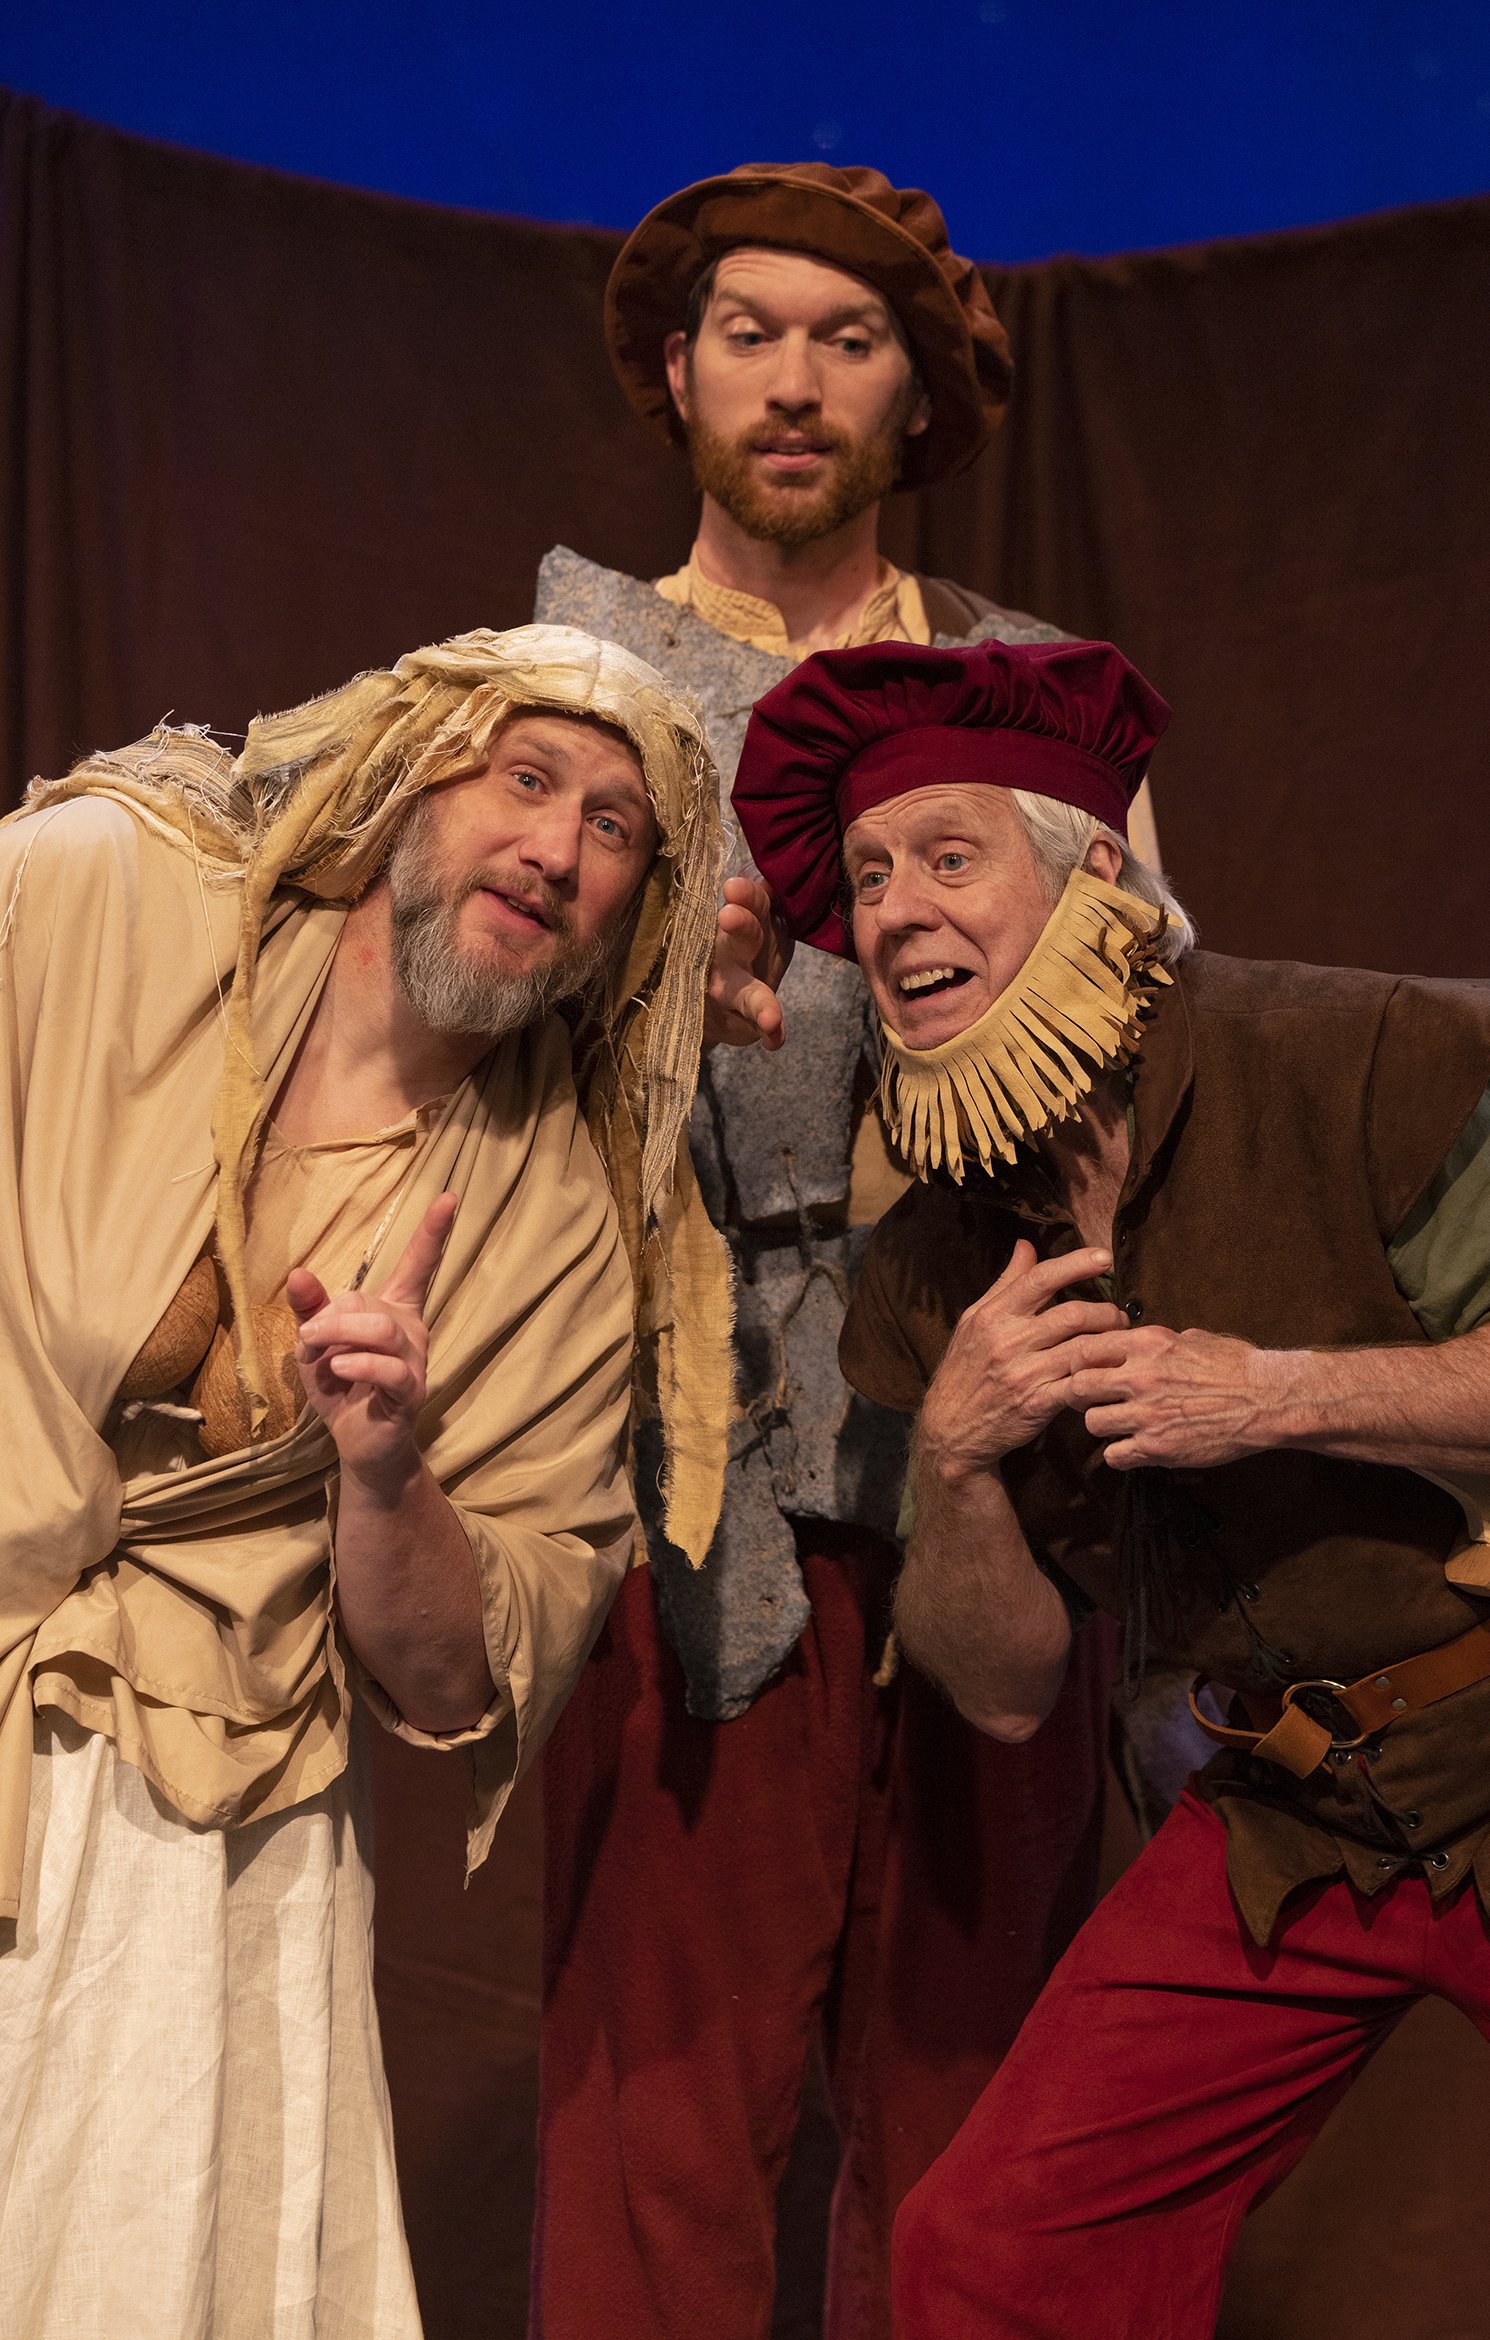 Matt Walley as Francis Flute, Christopher Pankratz as Tom Snout and Joseph McGrath as Nick Bottom portraying Thisbe, the Wall, and Pyramus. Photo by Tim Fuller.